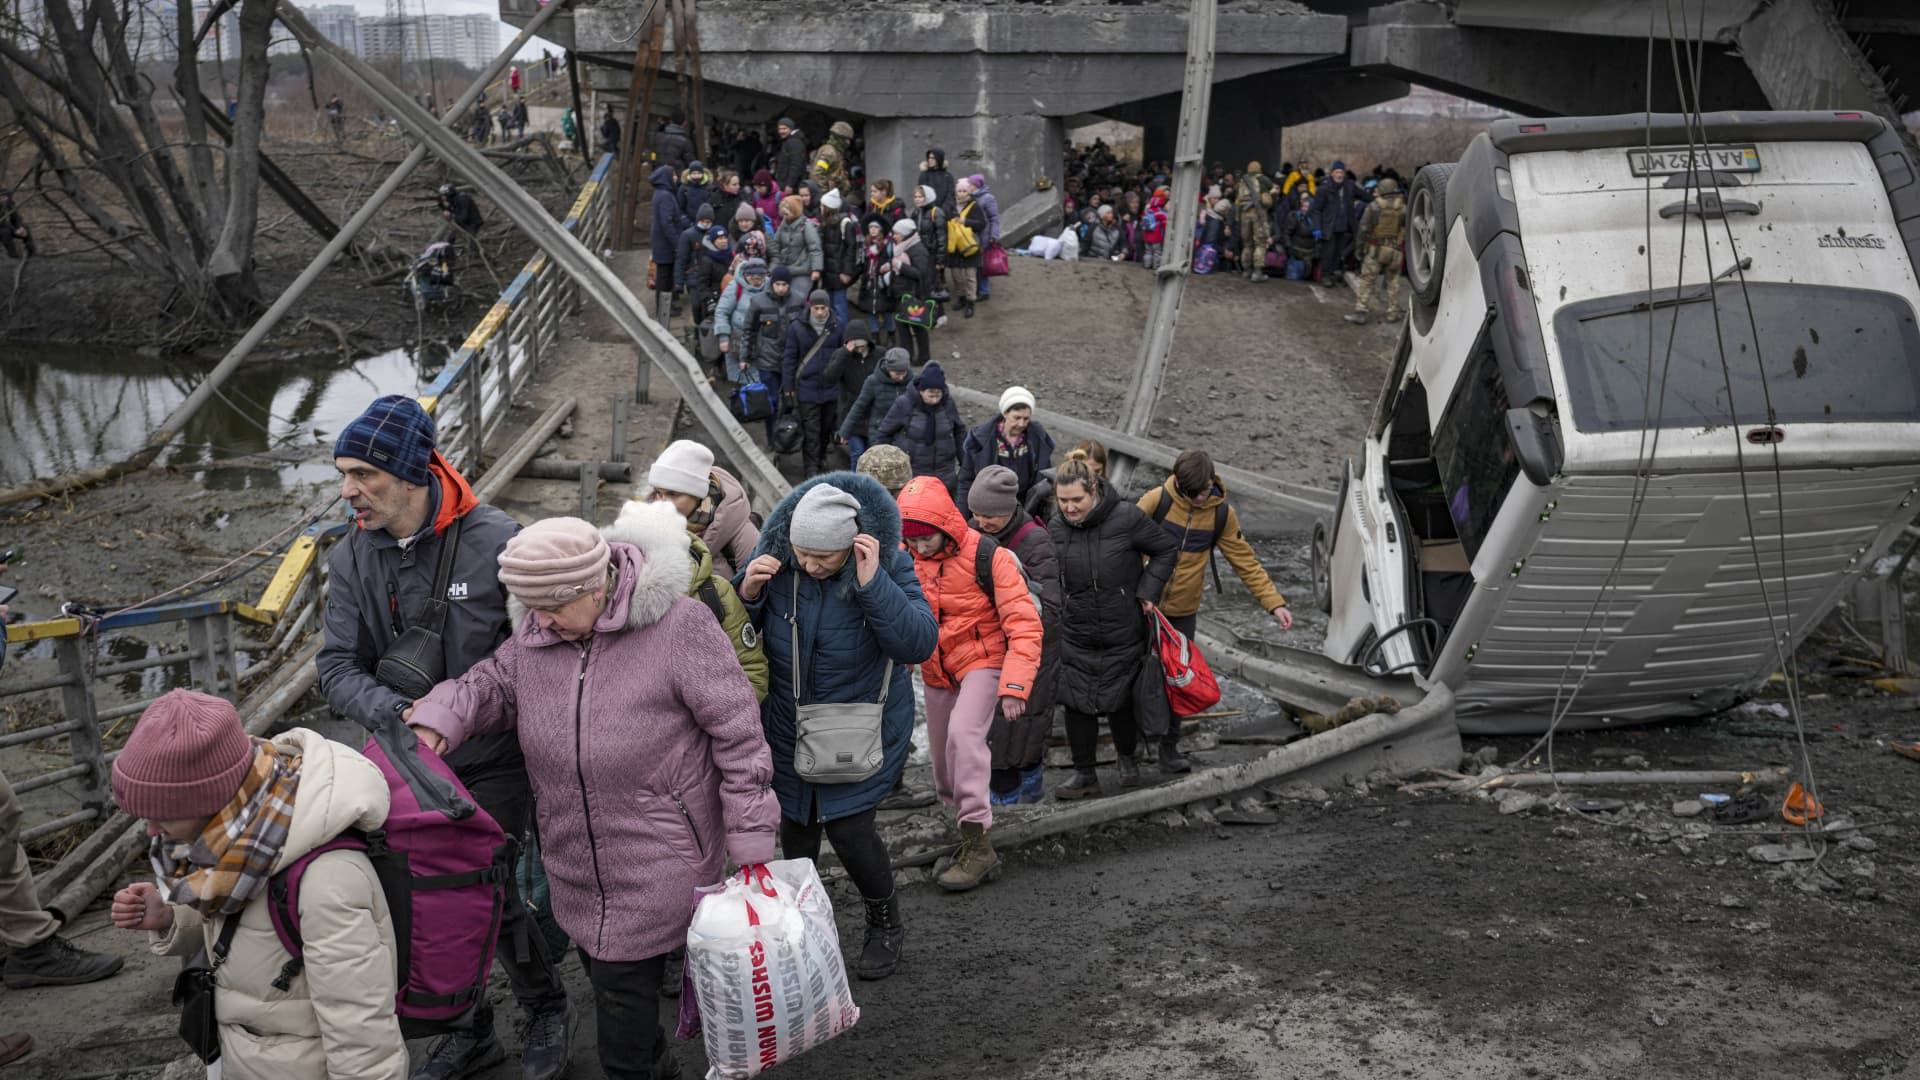 People cross on an improvised path under a bridge that was destroyed by a Russian airstrike, while fleeing the town of Irpin, Ukraine, Saturday, March 5, 2022.